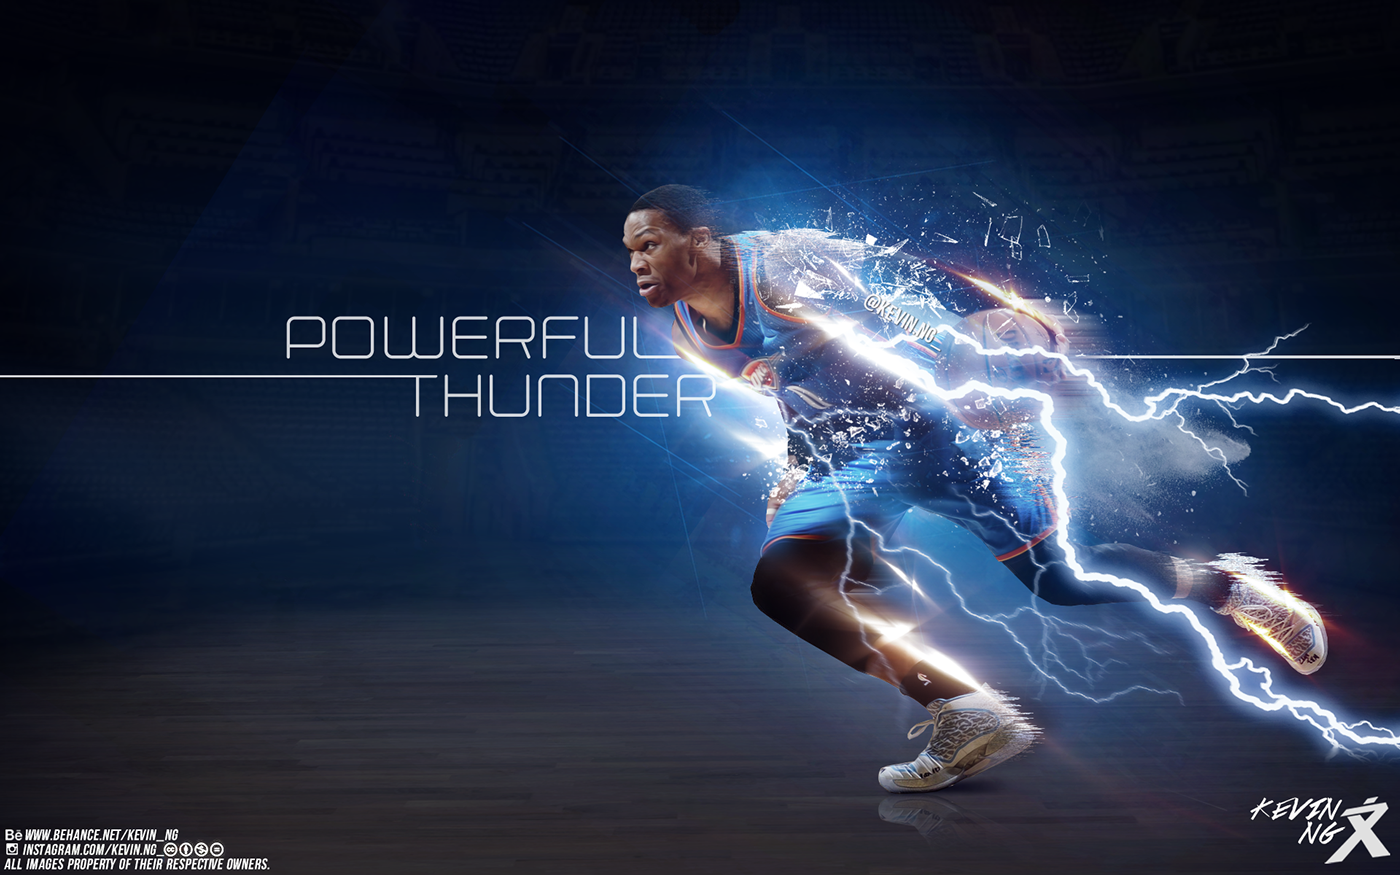 Russell Westbrook Powerful Thunder Wallpaper On